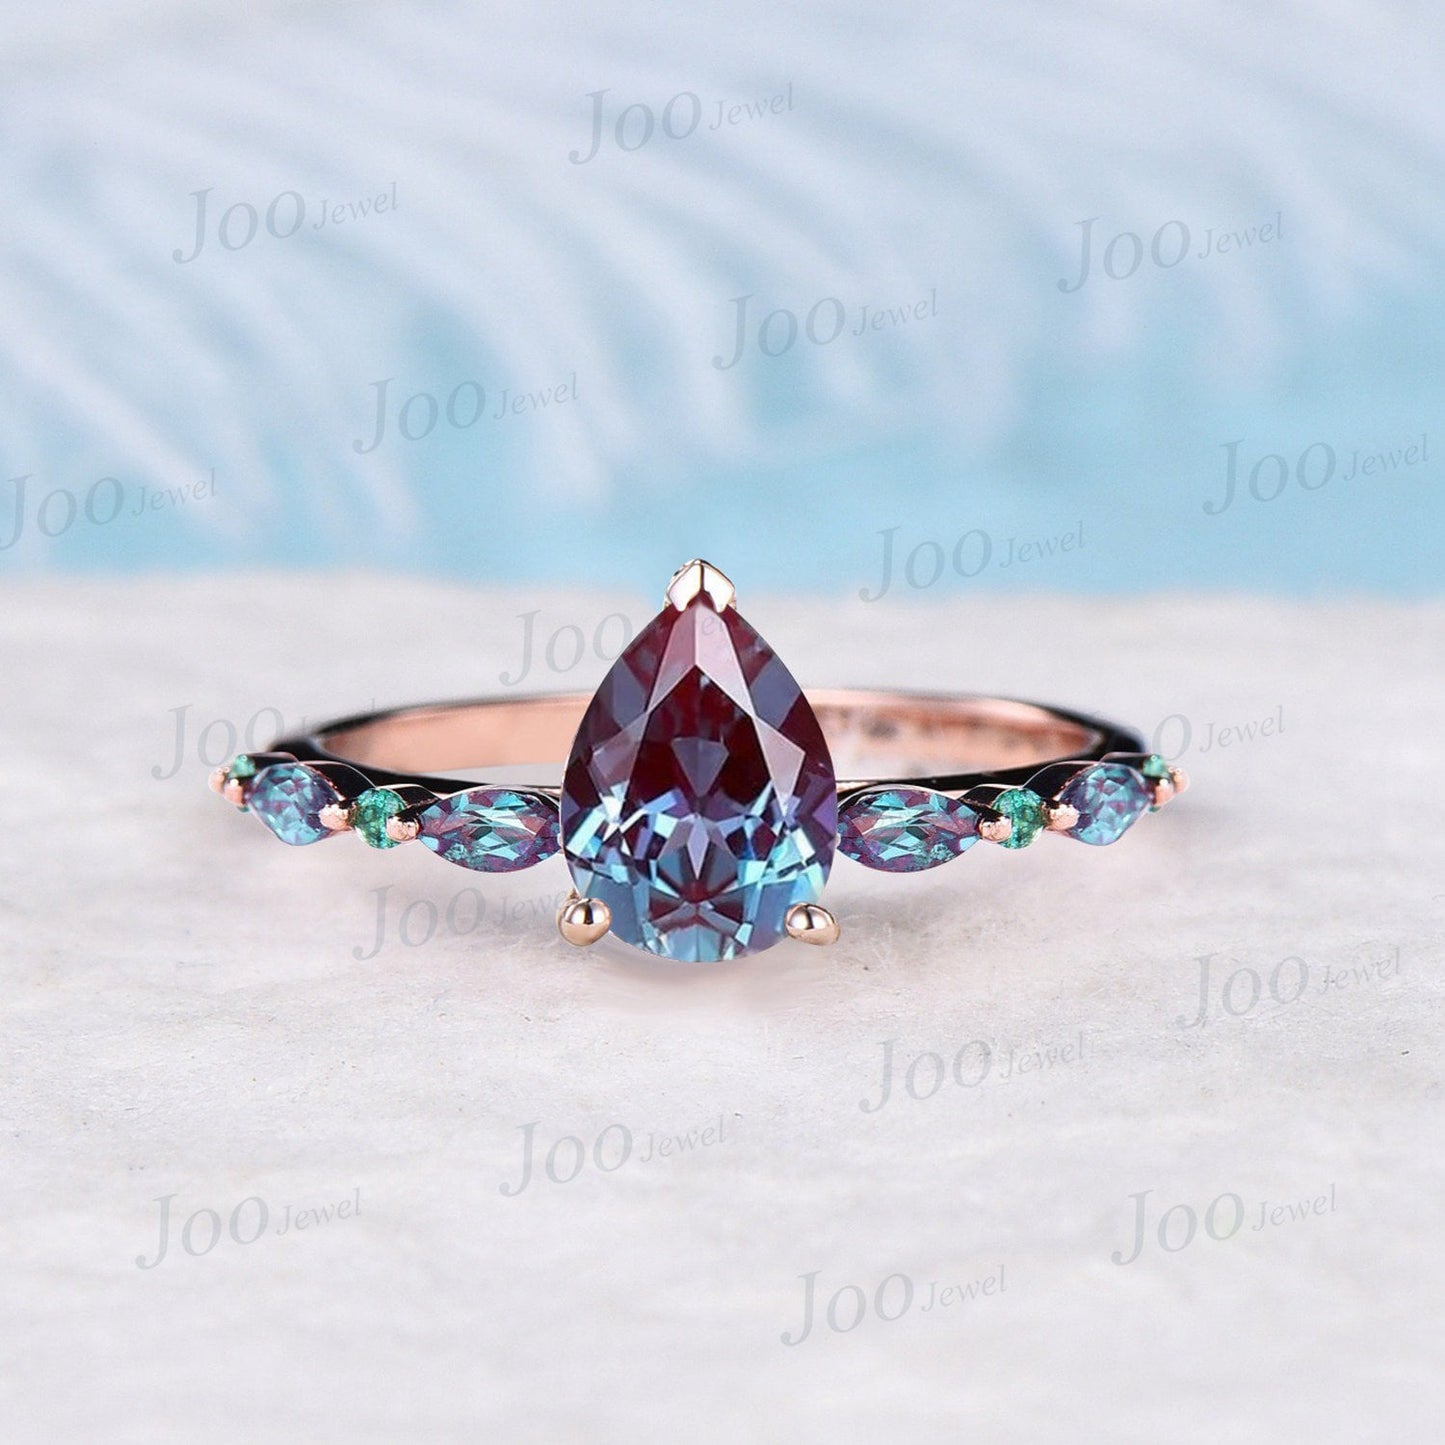 Unique Alexandrite Emerald Engagement Ring Half Eternity Vintage 1.25ct Pear Color-Change Alexandrite Ring June Birthstone Wedding Ring Gift